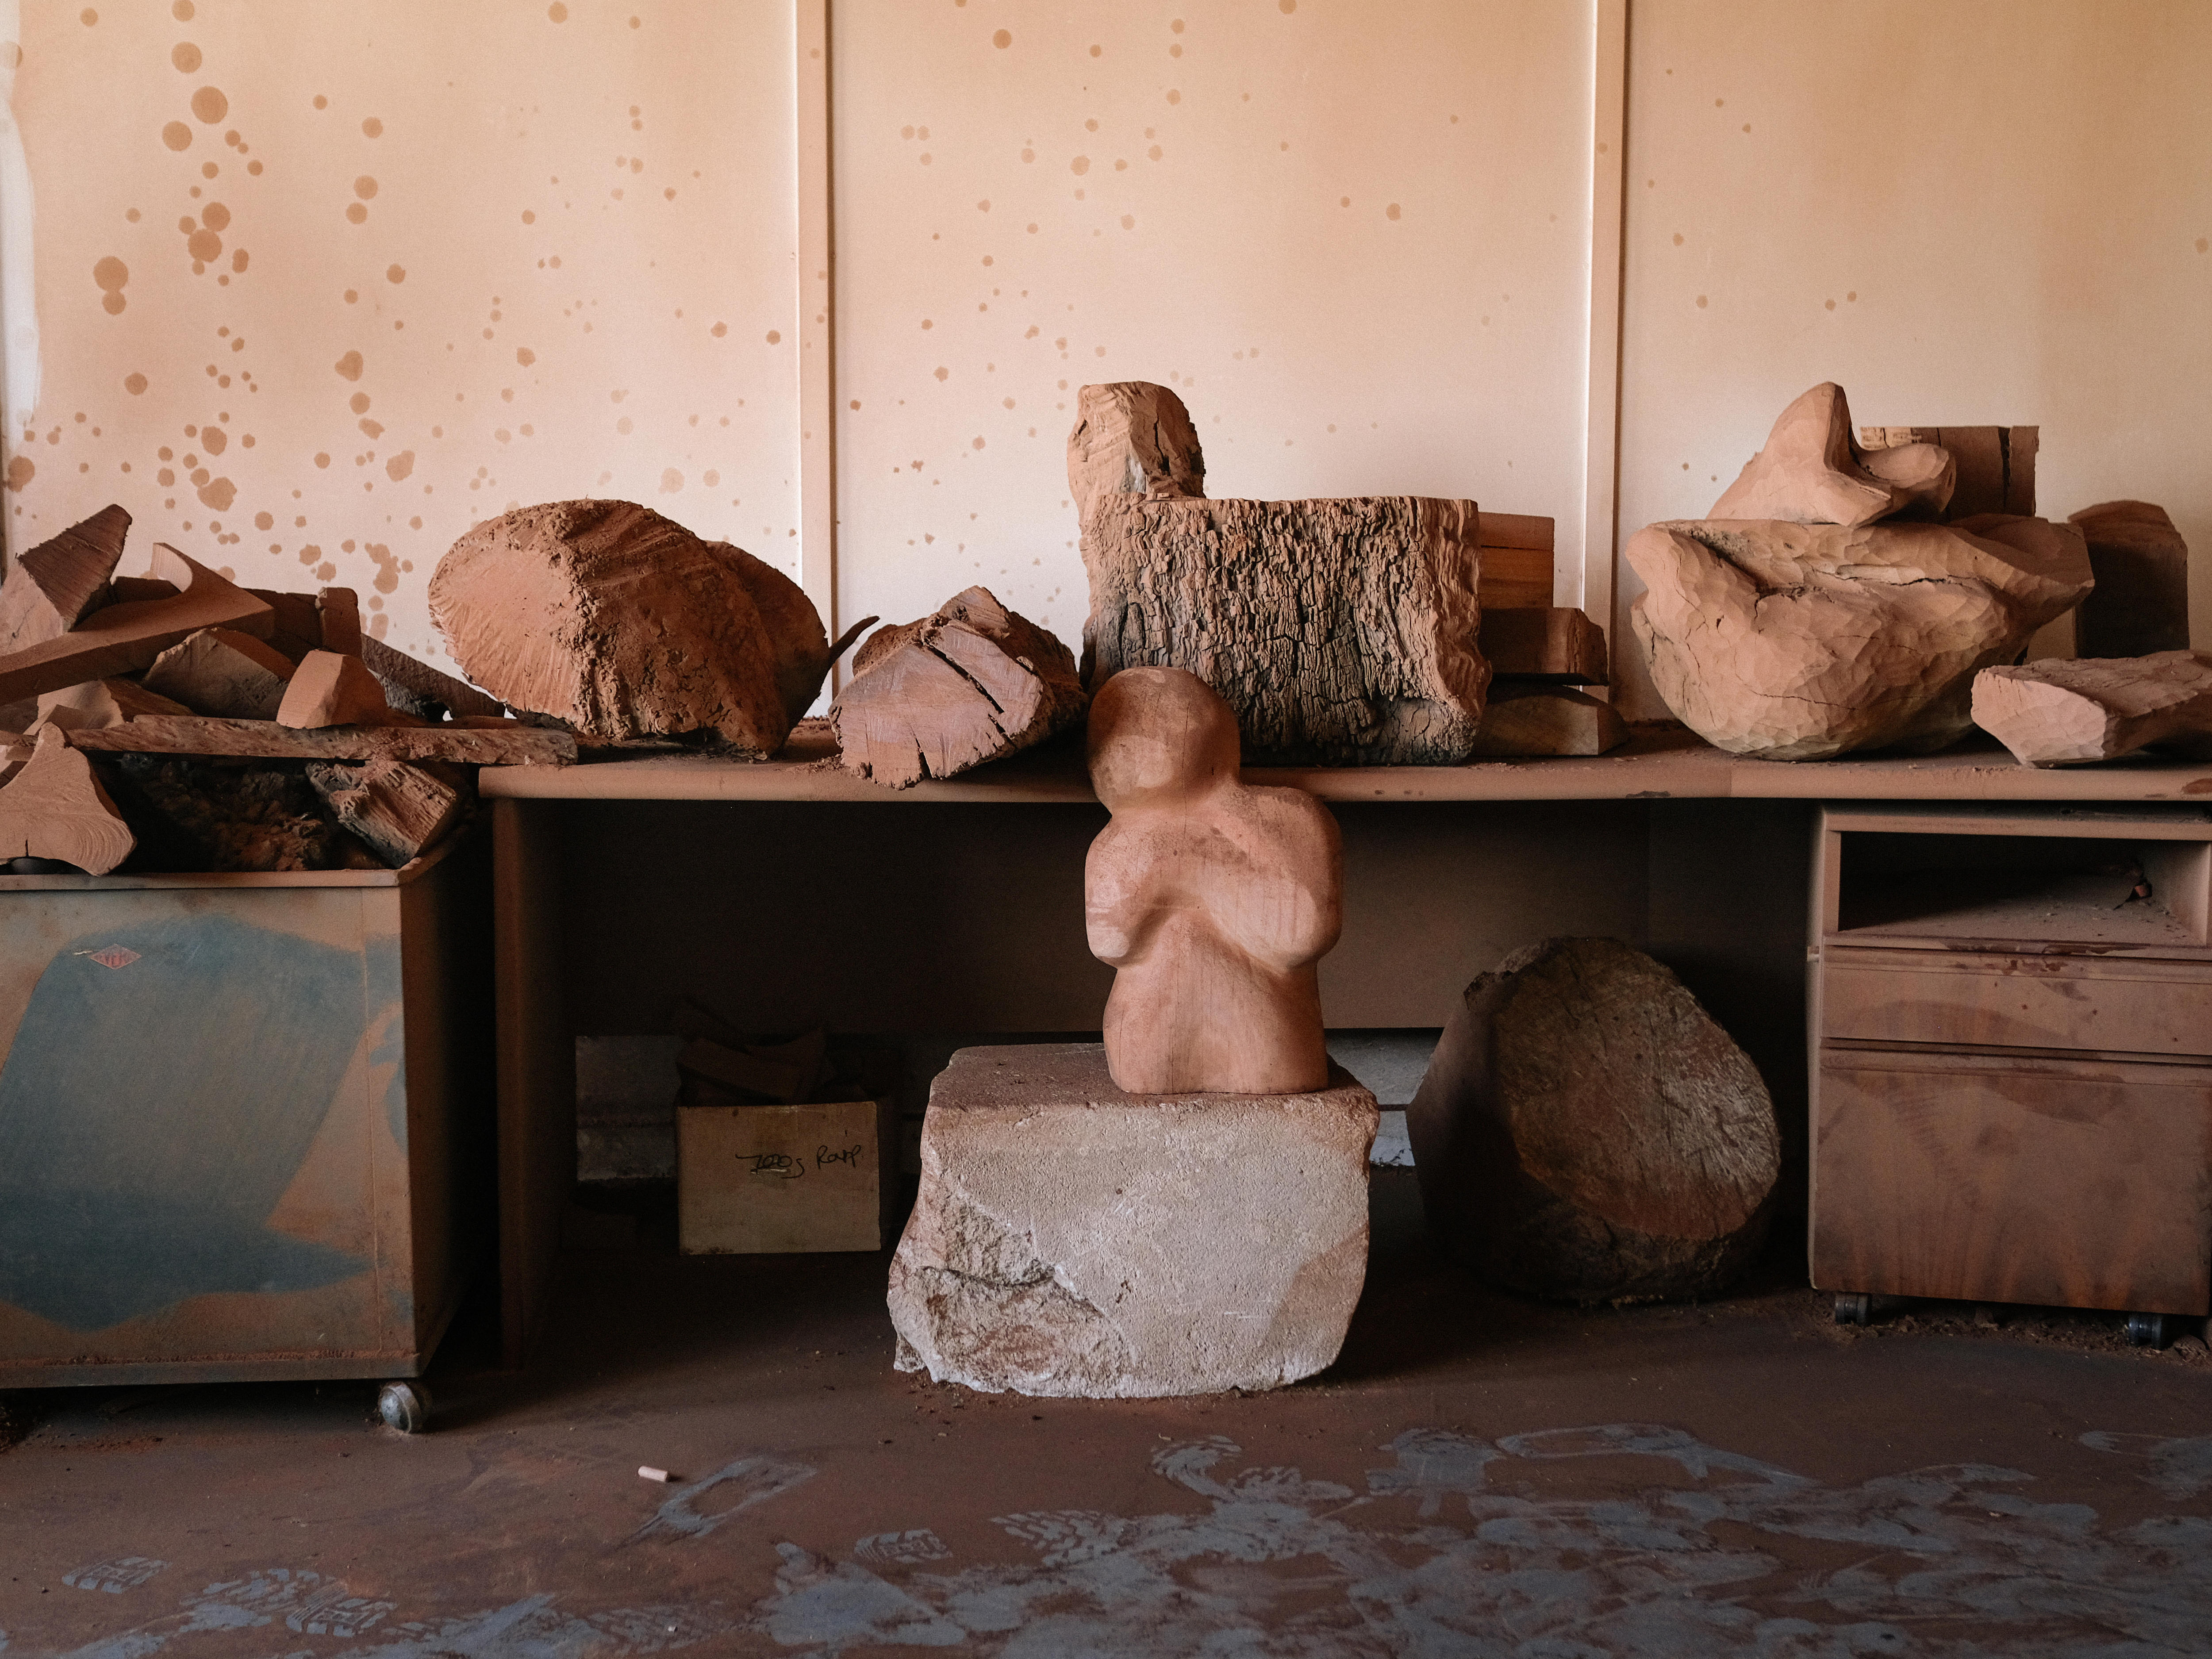 Pieces of wood scraps and half-finished sculptures in the artist's studio